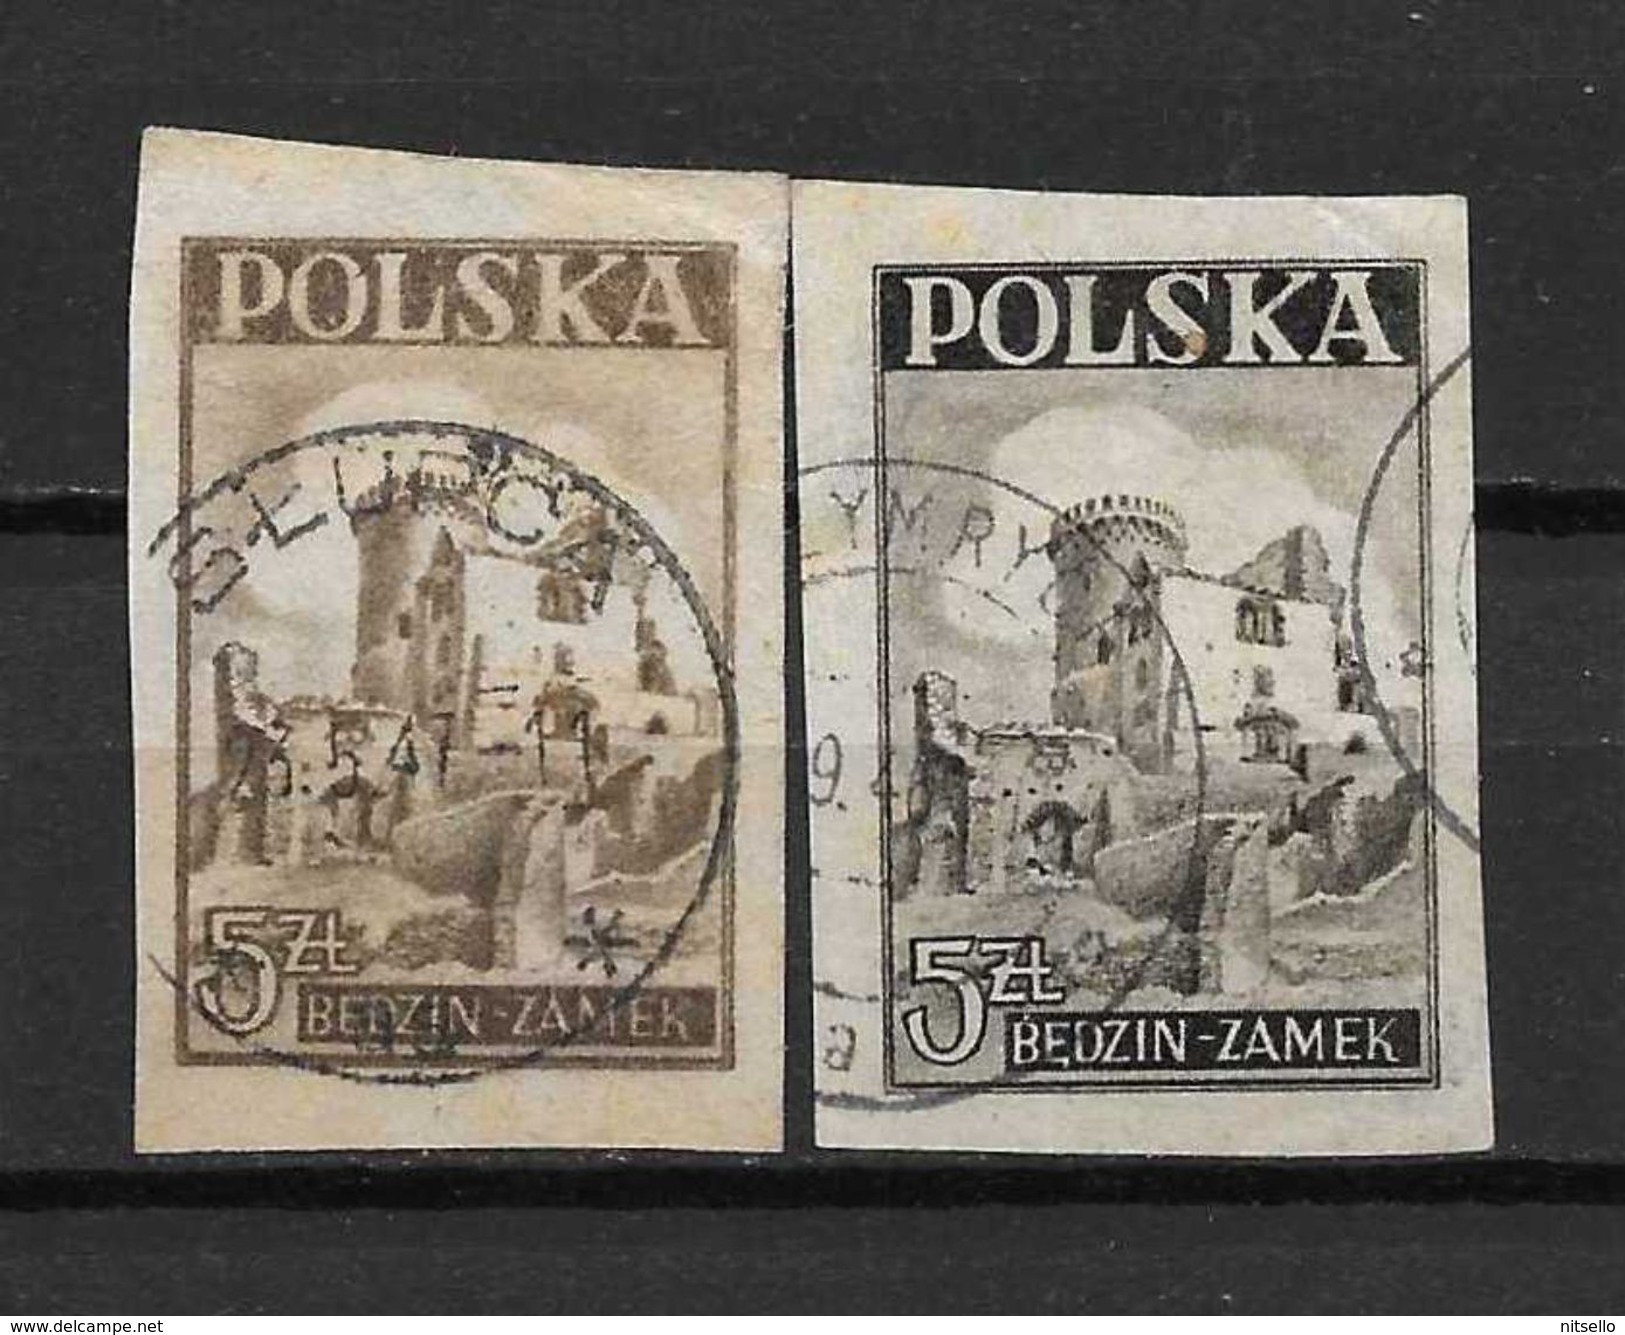 LOTE 1787  ///  POLONIA 1946       YVERT Nº: 478/479       ¡¡¡¡ LIQUIDATION !!!! - Used Stamps